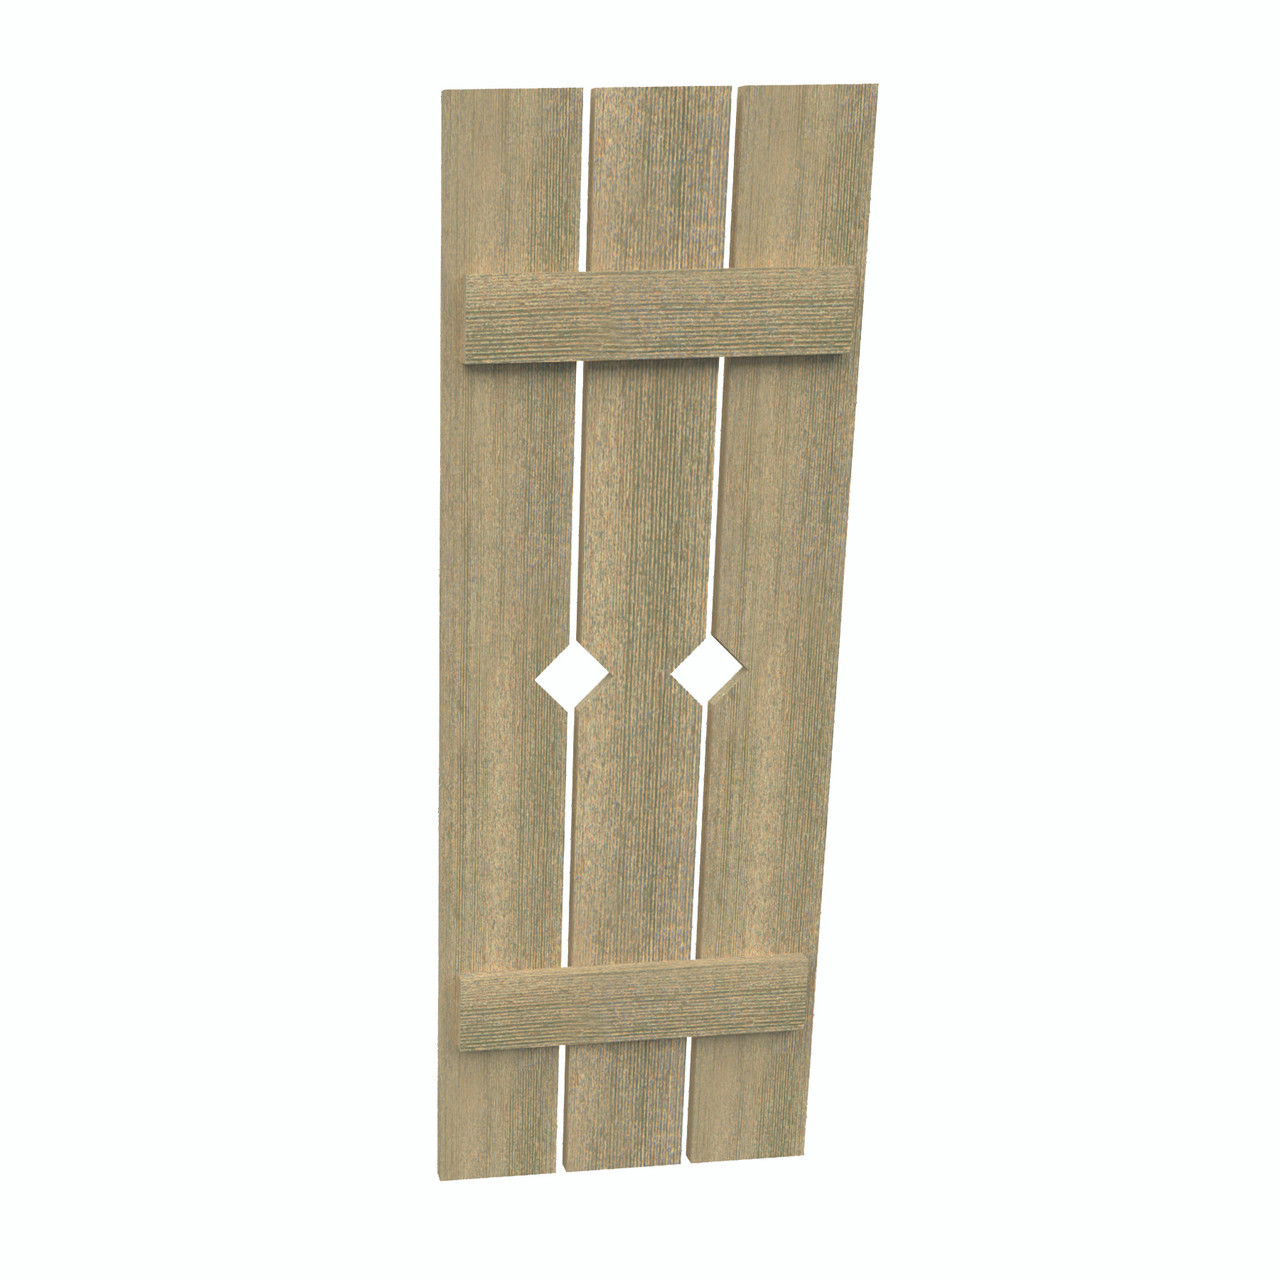 18 inch by 110 inch Plank Shutter with 3-Plank, Diamond